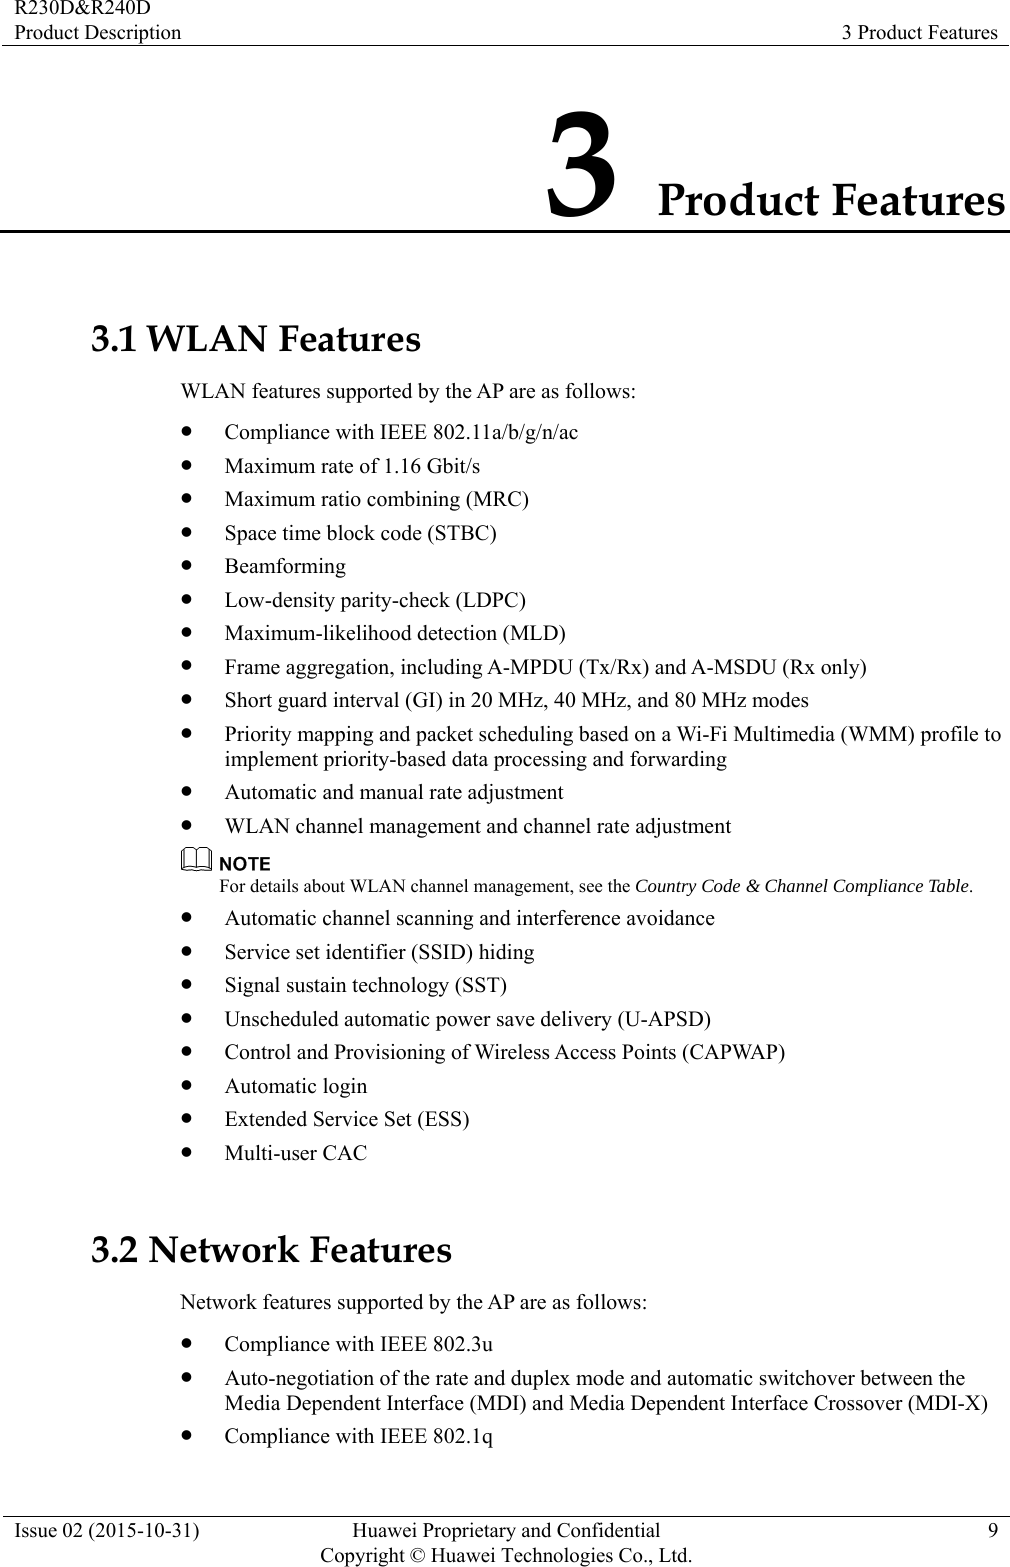 R230D&amp;R240D Product Description  3 Product Features Issue 02 (2015-10-31)  Huawei Proprietary and Confidential         Copyright © Huawei Technologies Co., Ltd.9 3 Product Features 3.1 WLAN Features WLAN features supported by the AP are as follows: z Compliance with IEEE 802.11a/b/g/n/ac z Maximum rate of 1.16 Gbit/s z Maximum ratio combining (MRC) z Space time block code (STBC) z Beamforming z Low-density parity-check (LDPC) z Maximum-likelihood detection (MLD) z Frame aggregation, including A-MPDU (Tx/Rx) and A-MSDU (Rx only) z Short guard interval (GI) in 20 MHz, 40 MHz, and 80 MHz modes z Priority mapping and packet scheduling based on a Wi-Fi Multimedia (WMM) profile to implement priority-based data processing and forwarding z Automatic and manual rate adjustment z WLAN channel management and channel rate adjustment  For details about WLAN channel management, see the Country Code &amp; Channel Compliance Table. z Automatic channel scanning and interference avoidance z Service set identifier (SSID) hiding z Signal sustain technology (SST) z Unscheduled automatic power save delivery (U-APSD) z Control and Provisioning of Wireless Access Points (CAPWAP) z Automatic login z Extended Service Set (ESS) z Multi-user CAC 3.2 Network Features Network features supported by the AP are as follows: z Compliance with IEEE 802.3u z Auto-negotiation of the rate and duplex mode and automatic switchover between the Media Dependent Interface (MDI) and Media Dependent Interface Crossover (MDI-X) z Compliance with IEEE 802.1q 